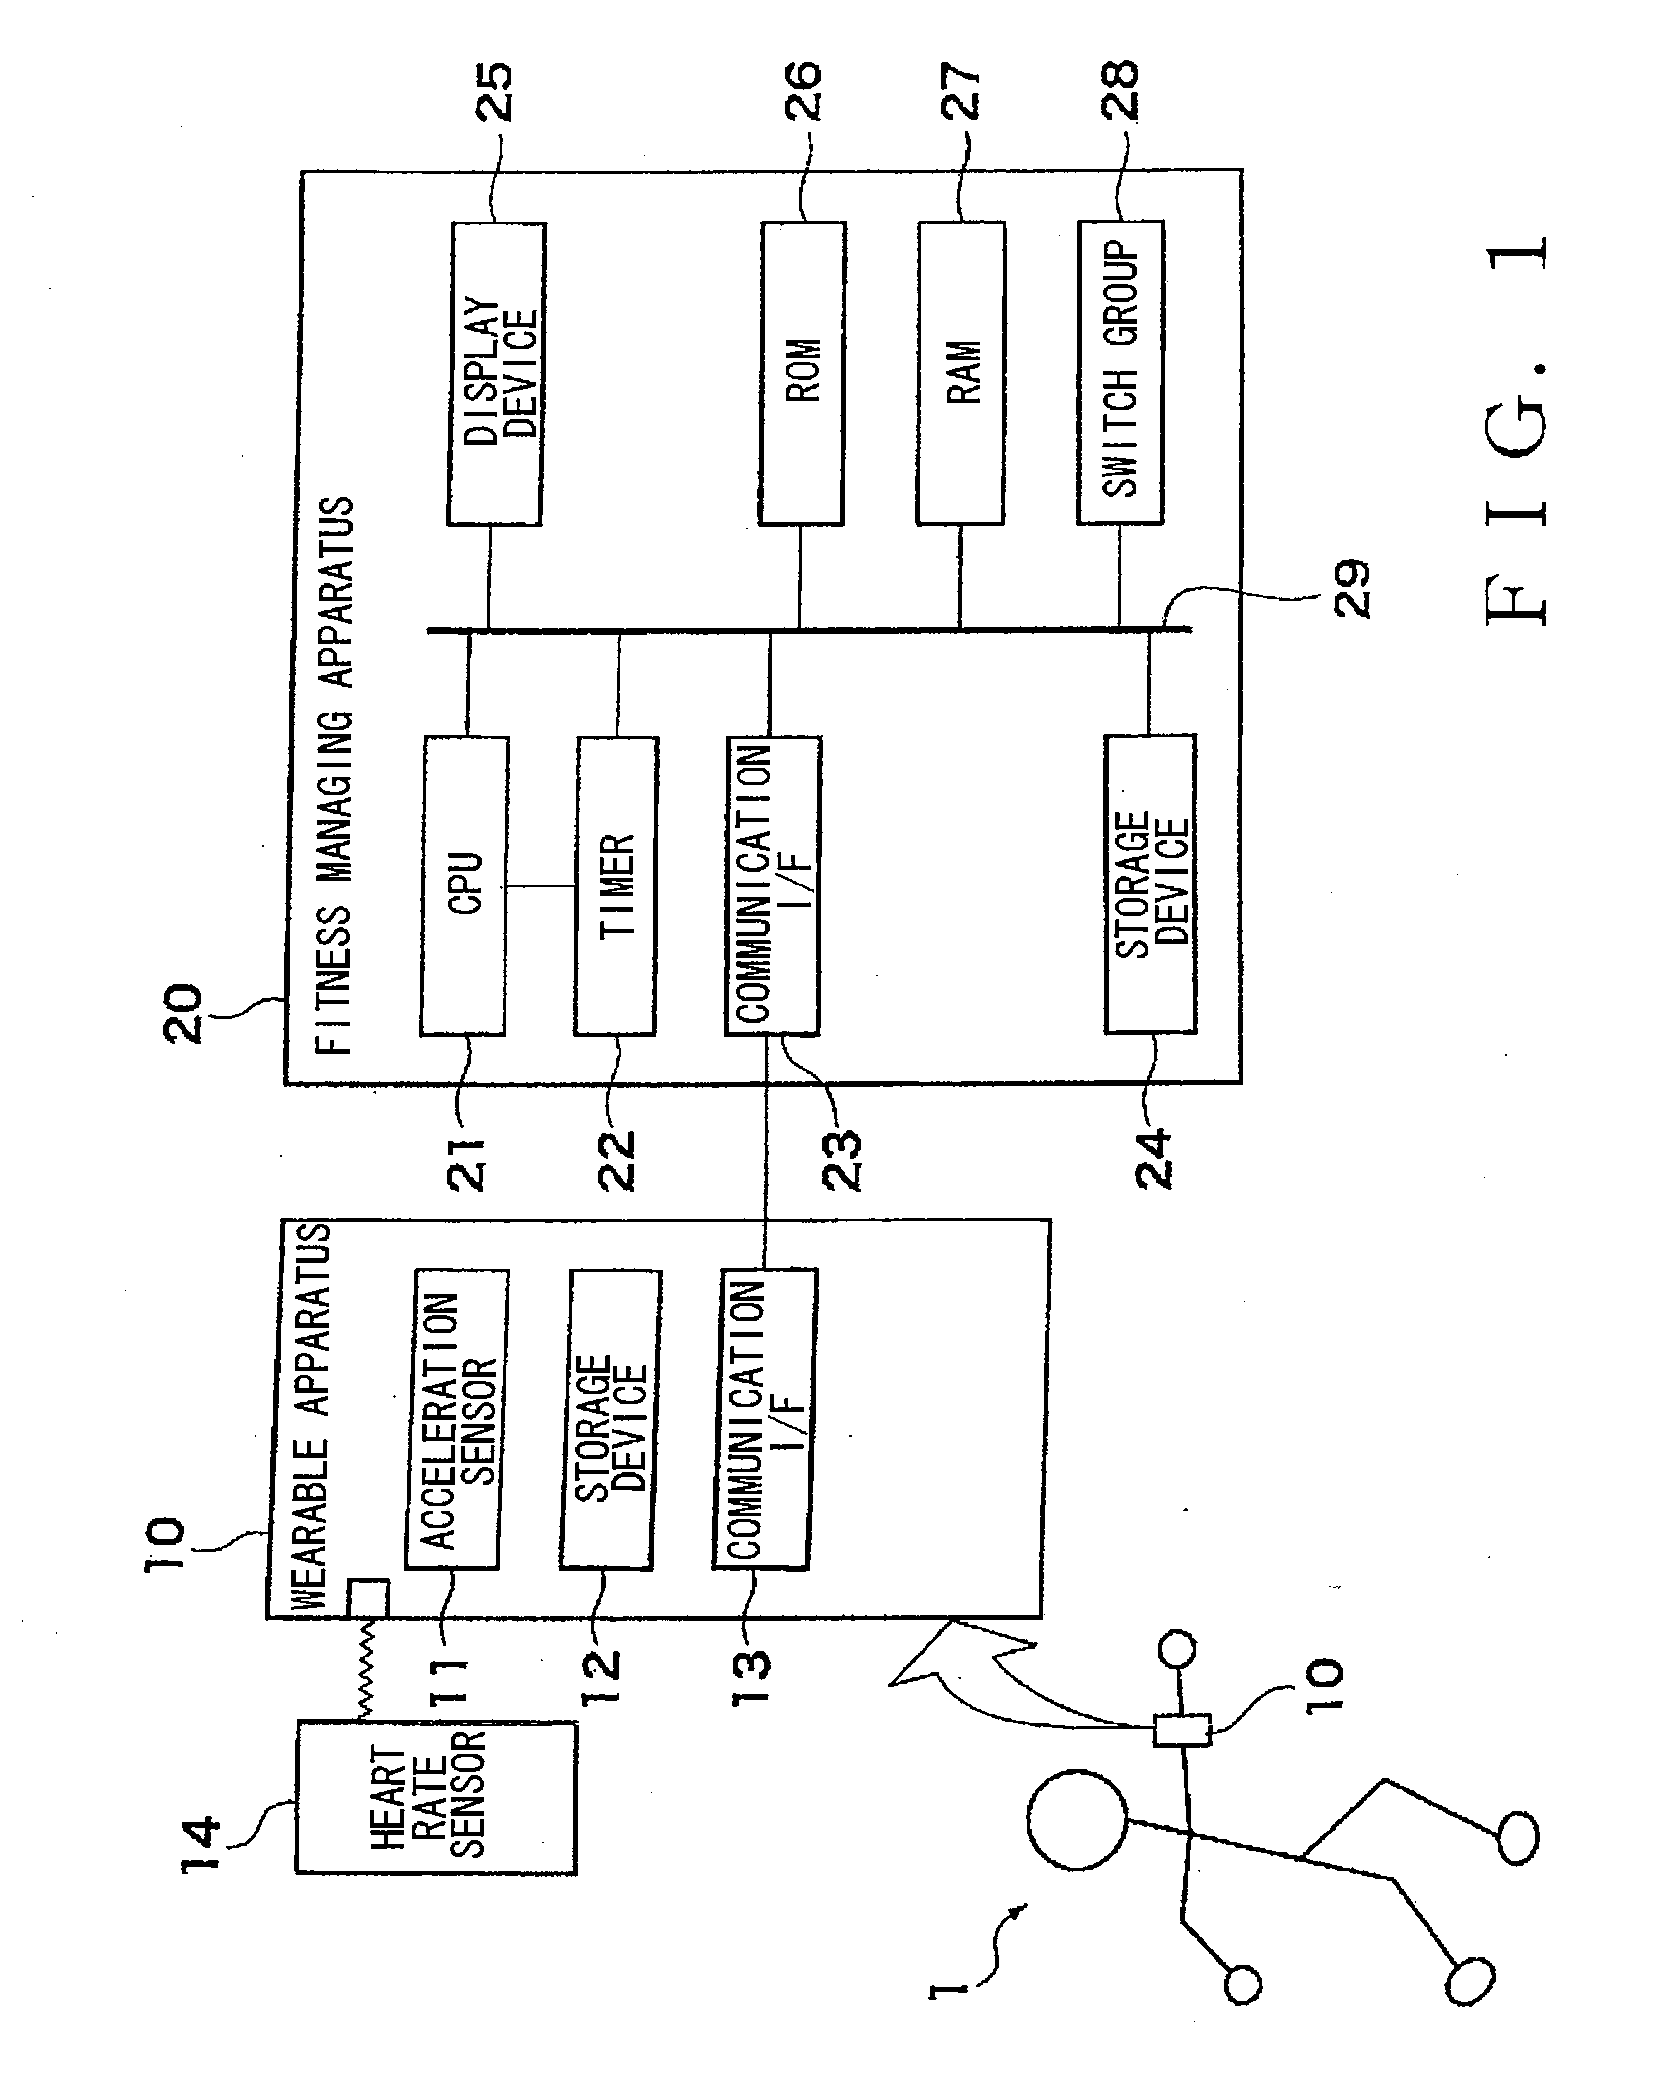 Apparatus for displaying fitness exercise condition